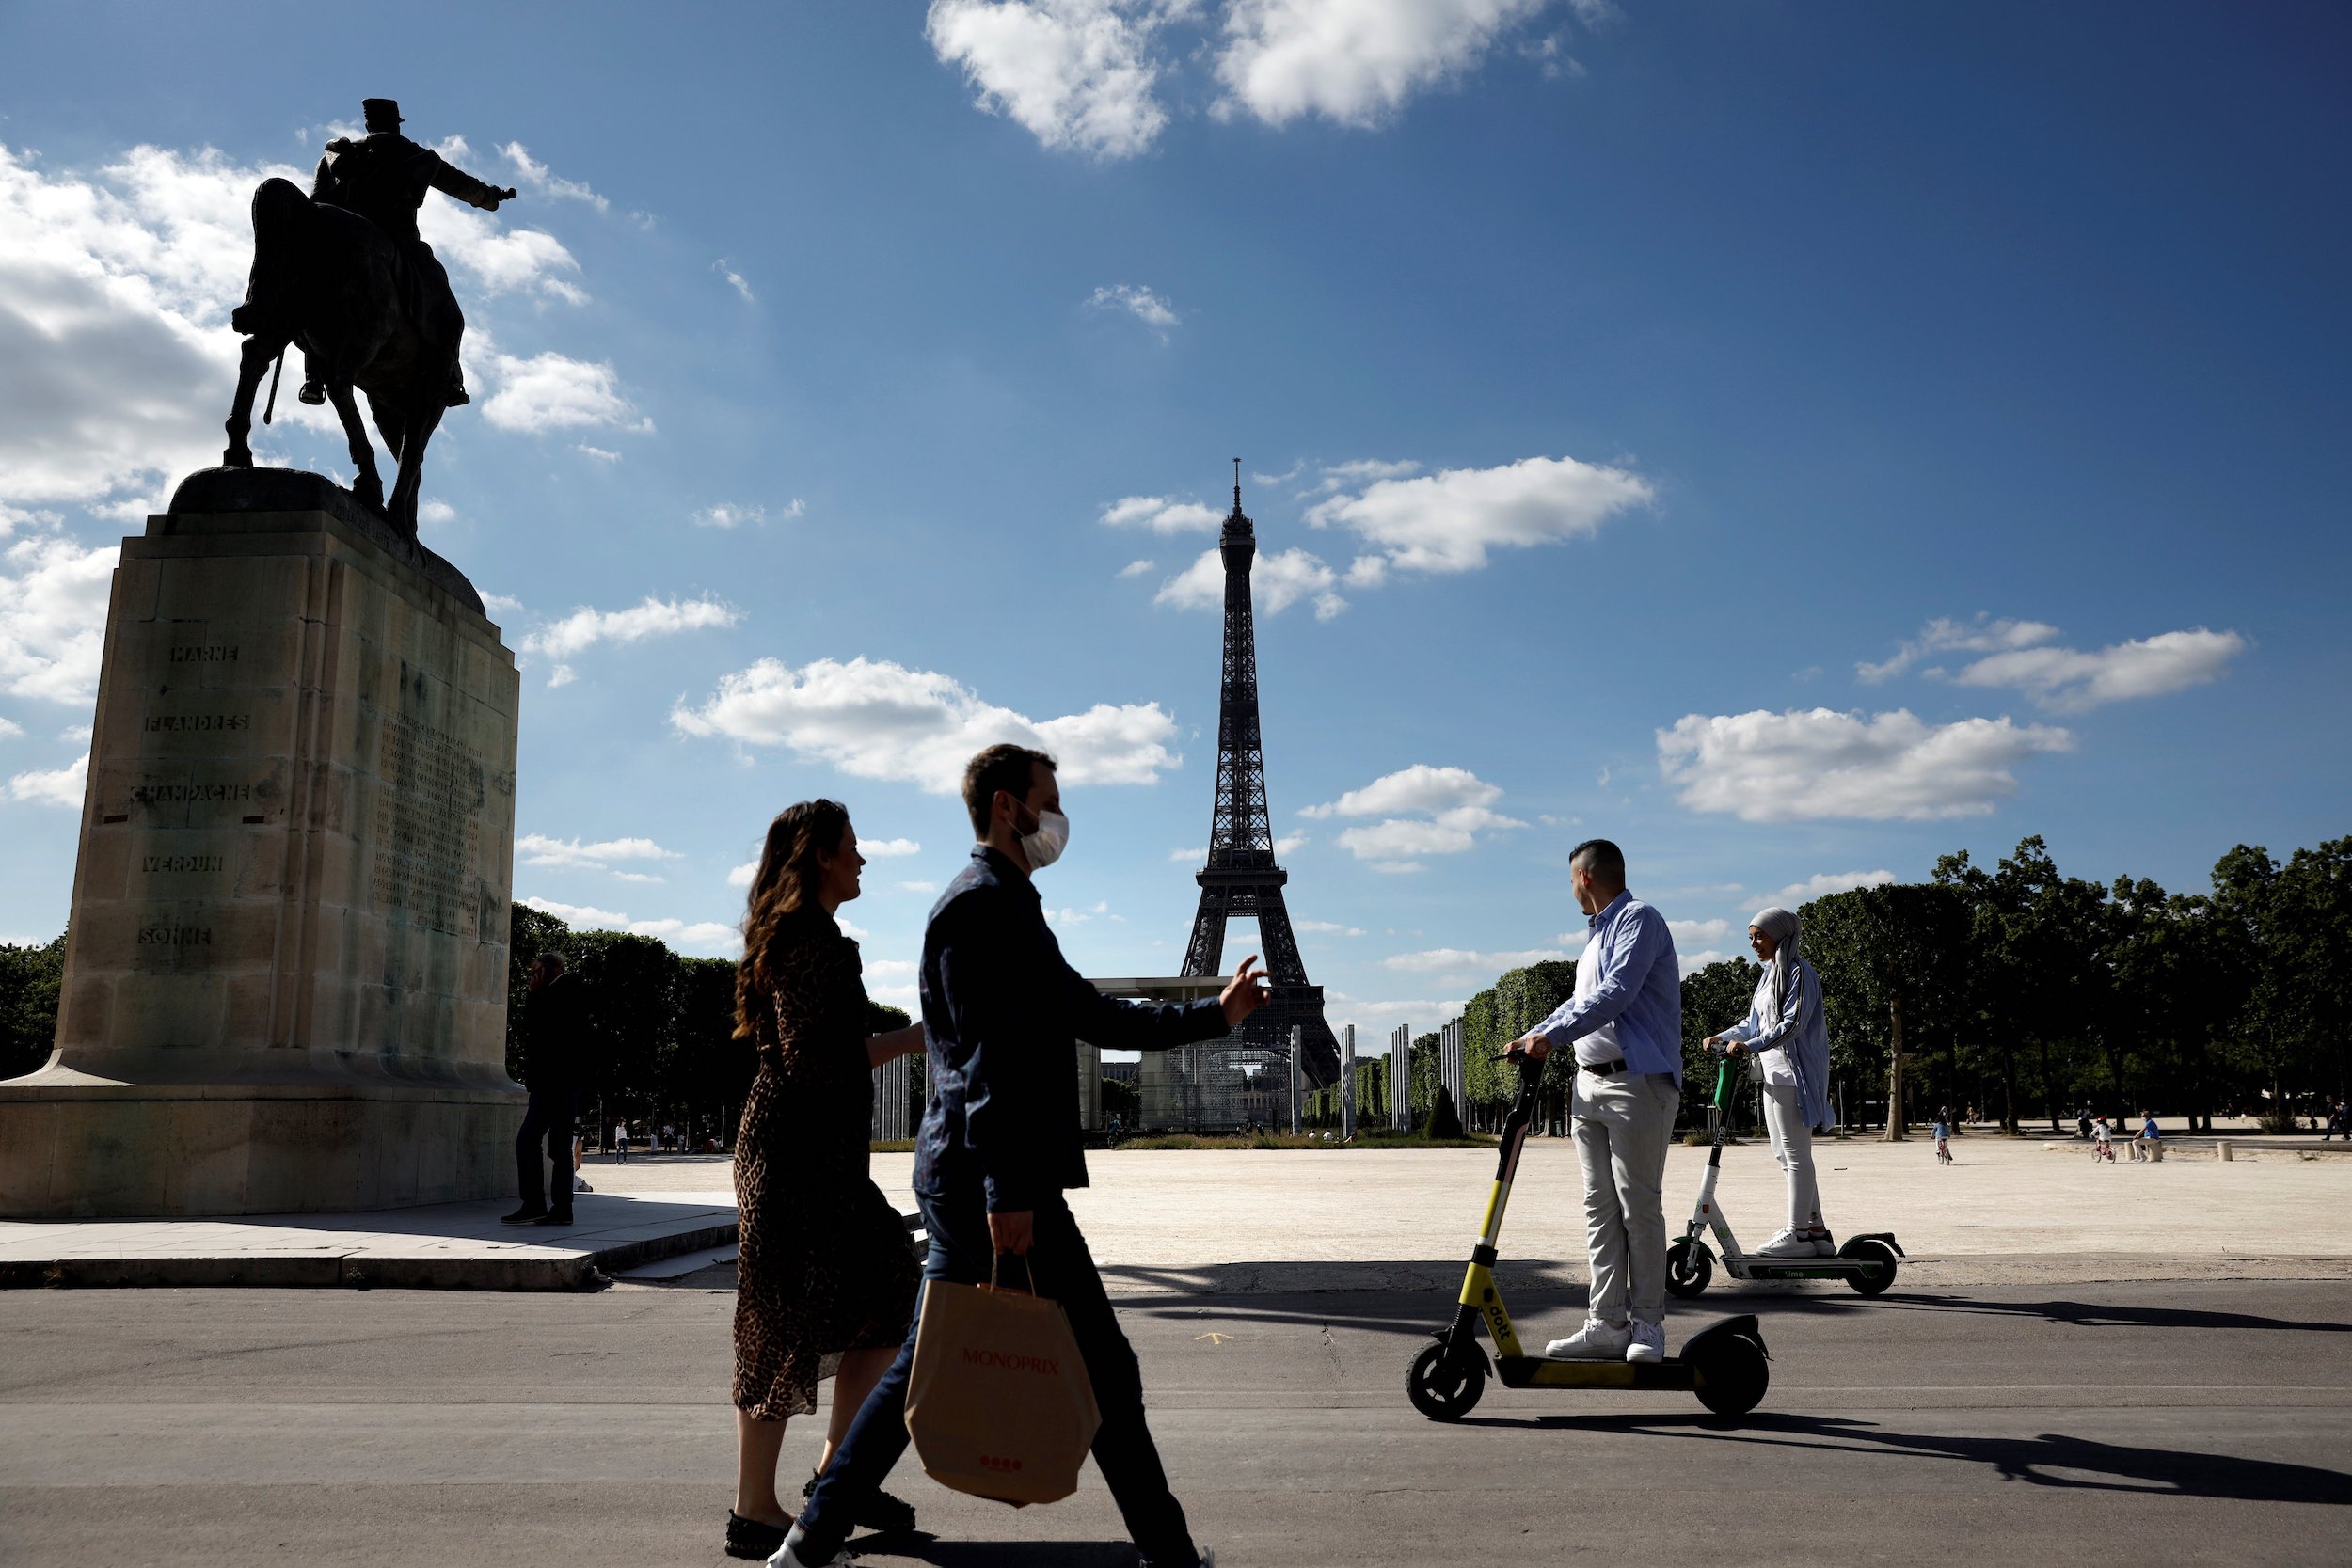 Micromobility in limbo: Takeaways from Paris and LA